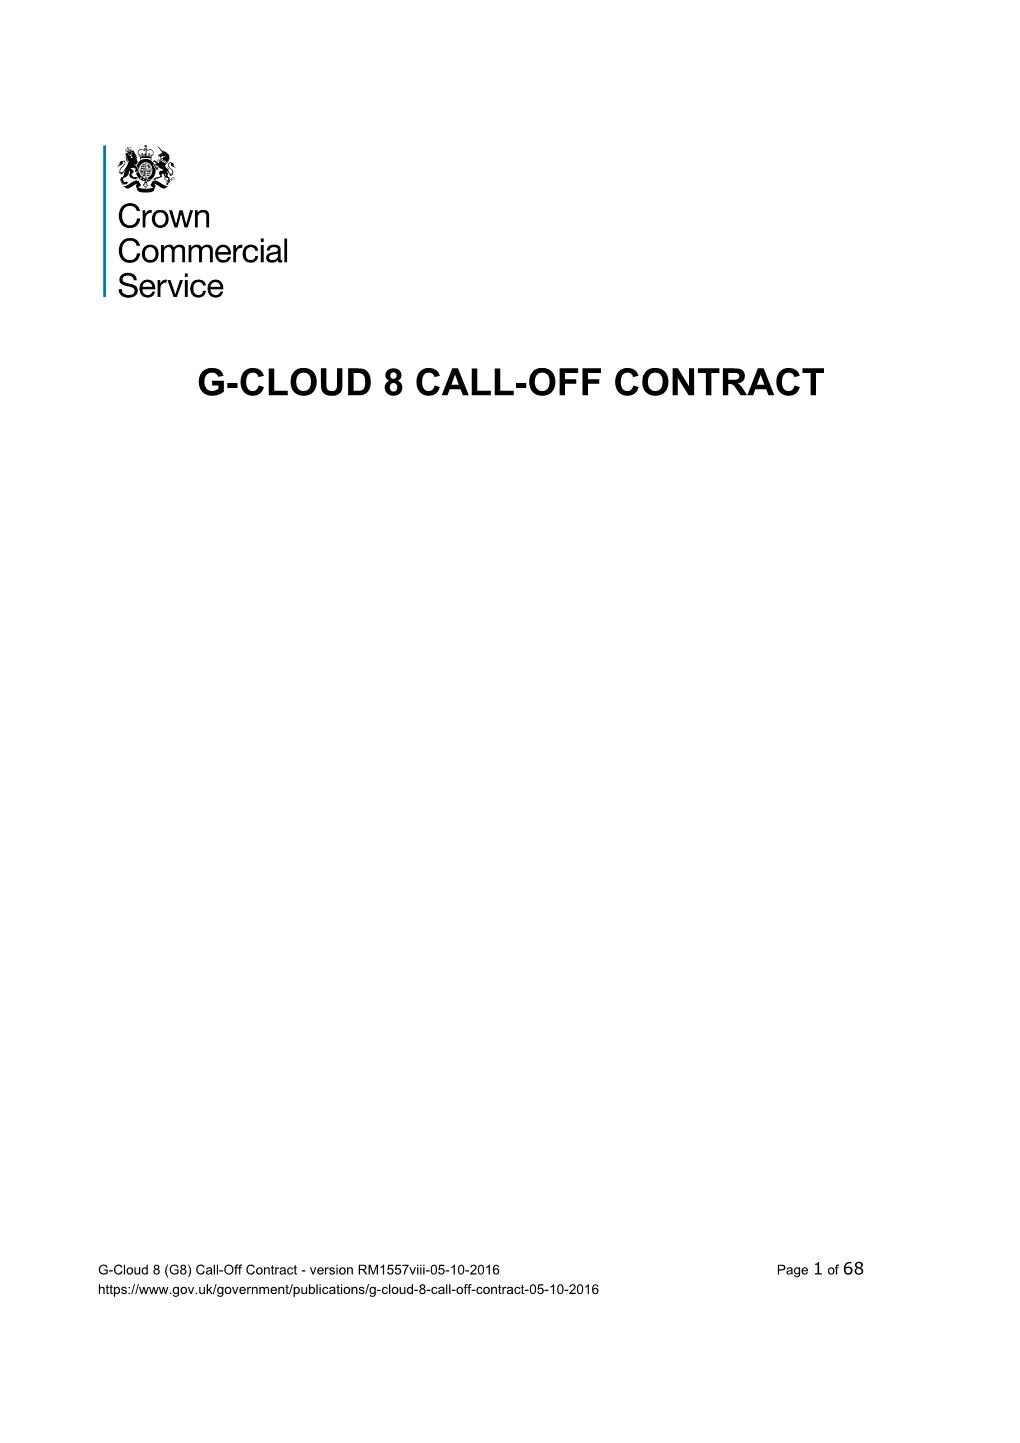 G-Cloud 8 Call-Off Contract